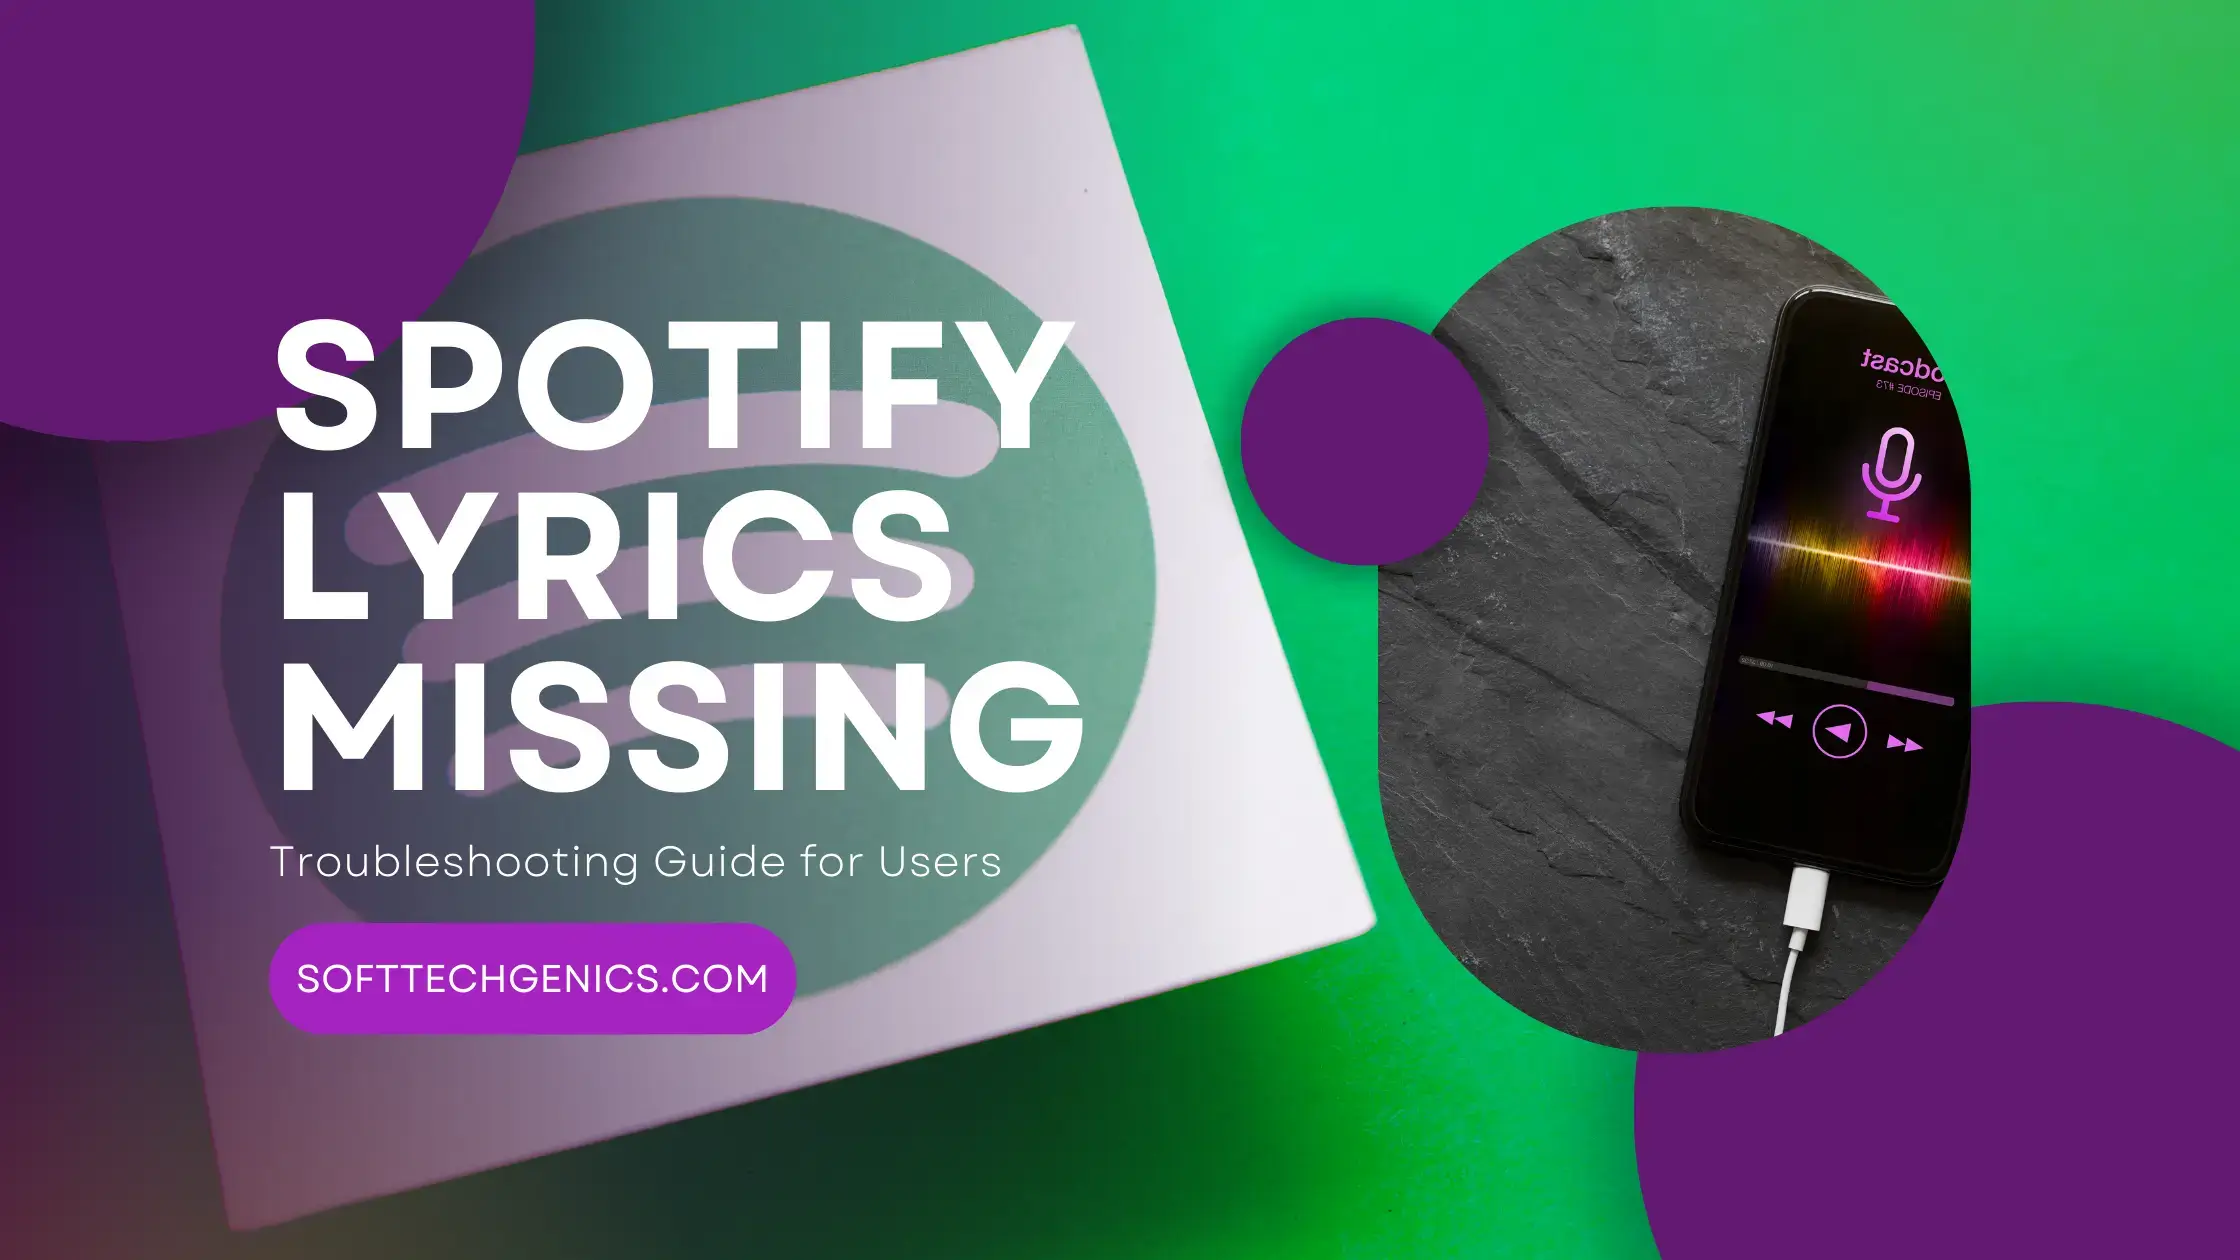 Spotify Lyrics Missing: Troubleshooting Guide for Users